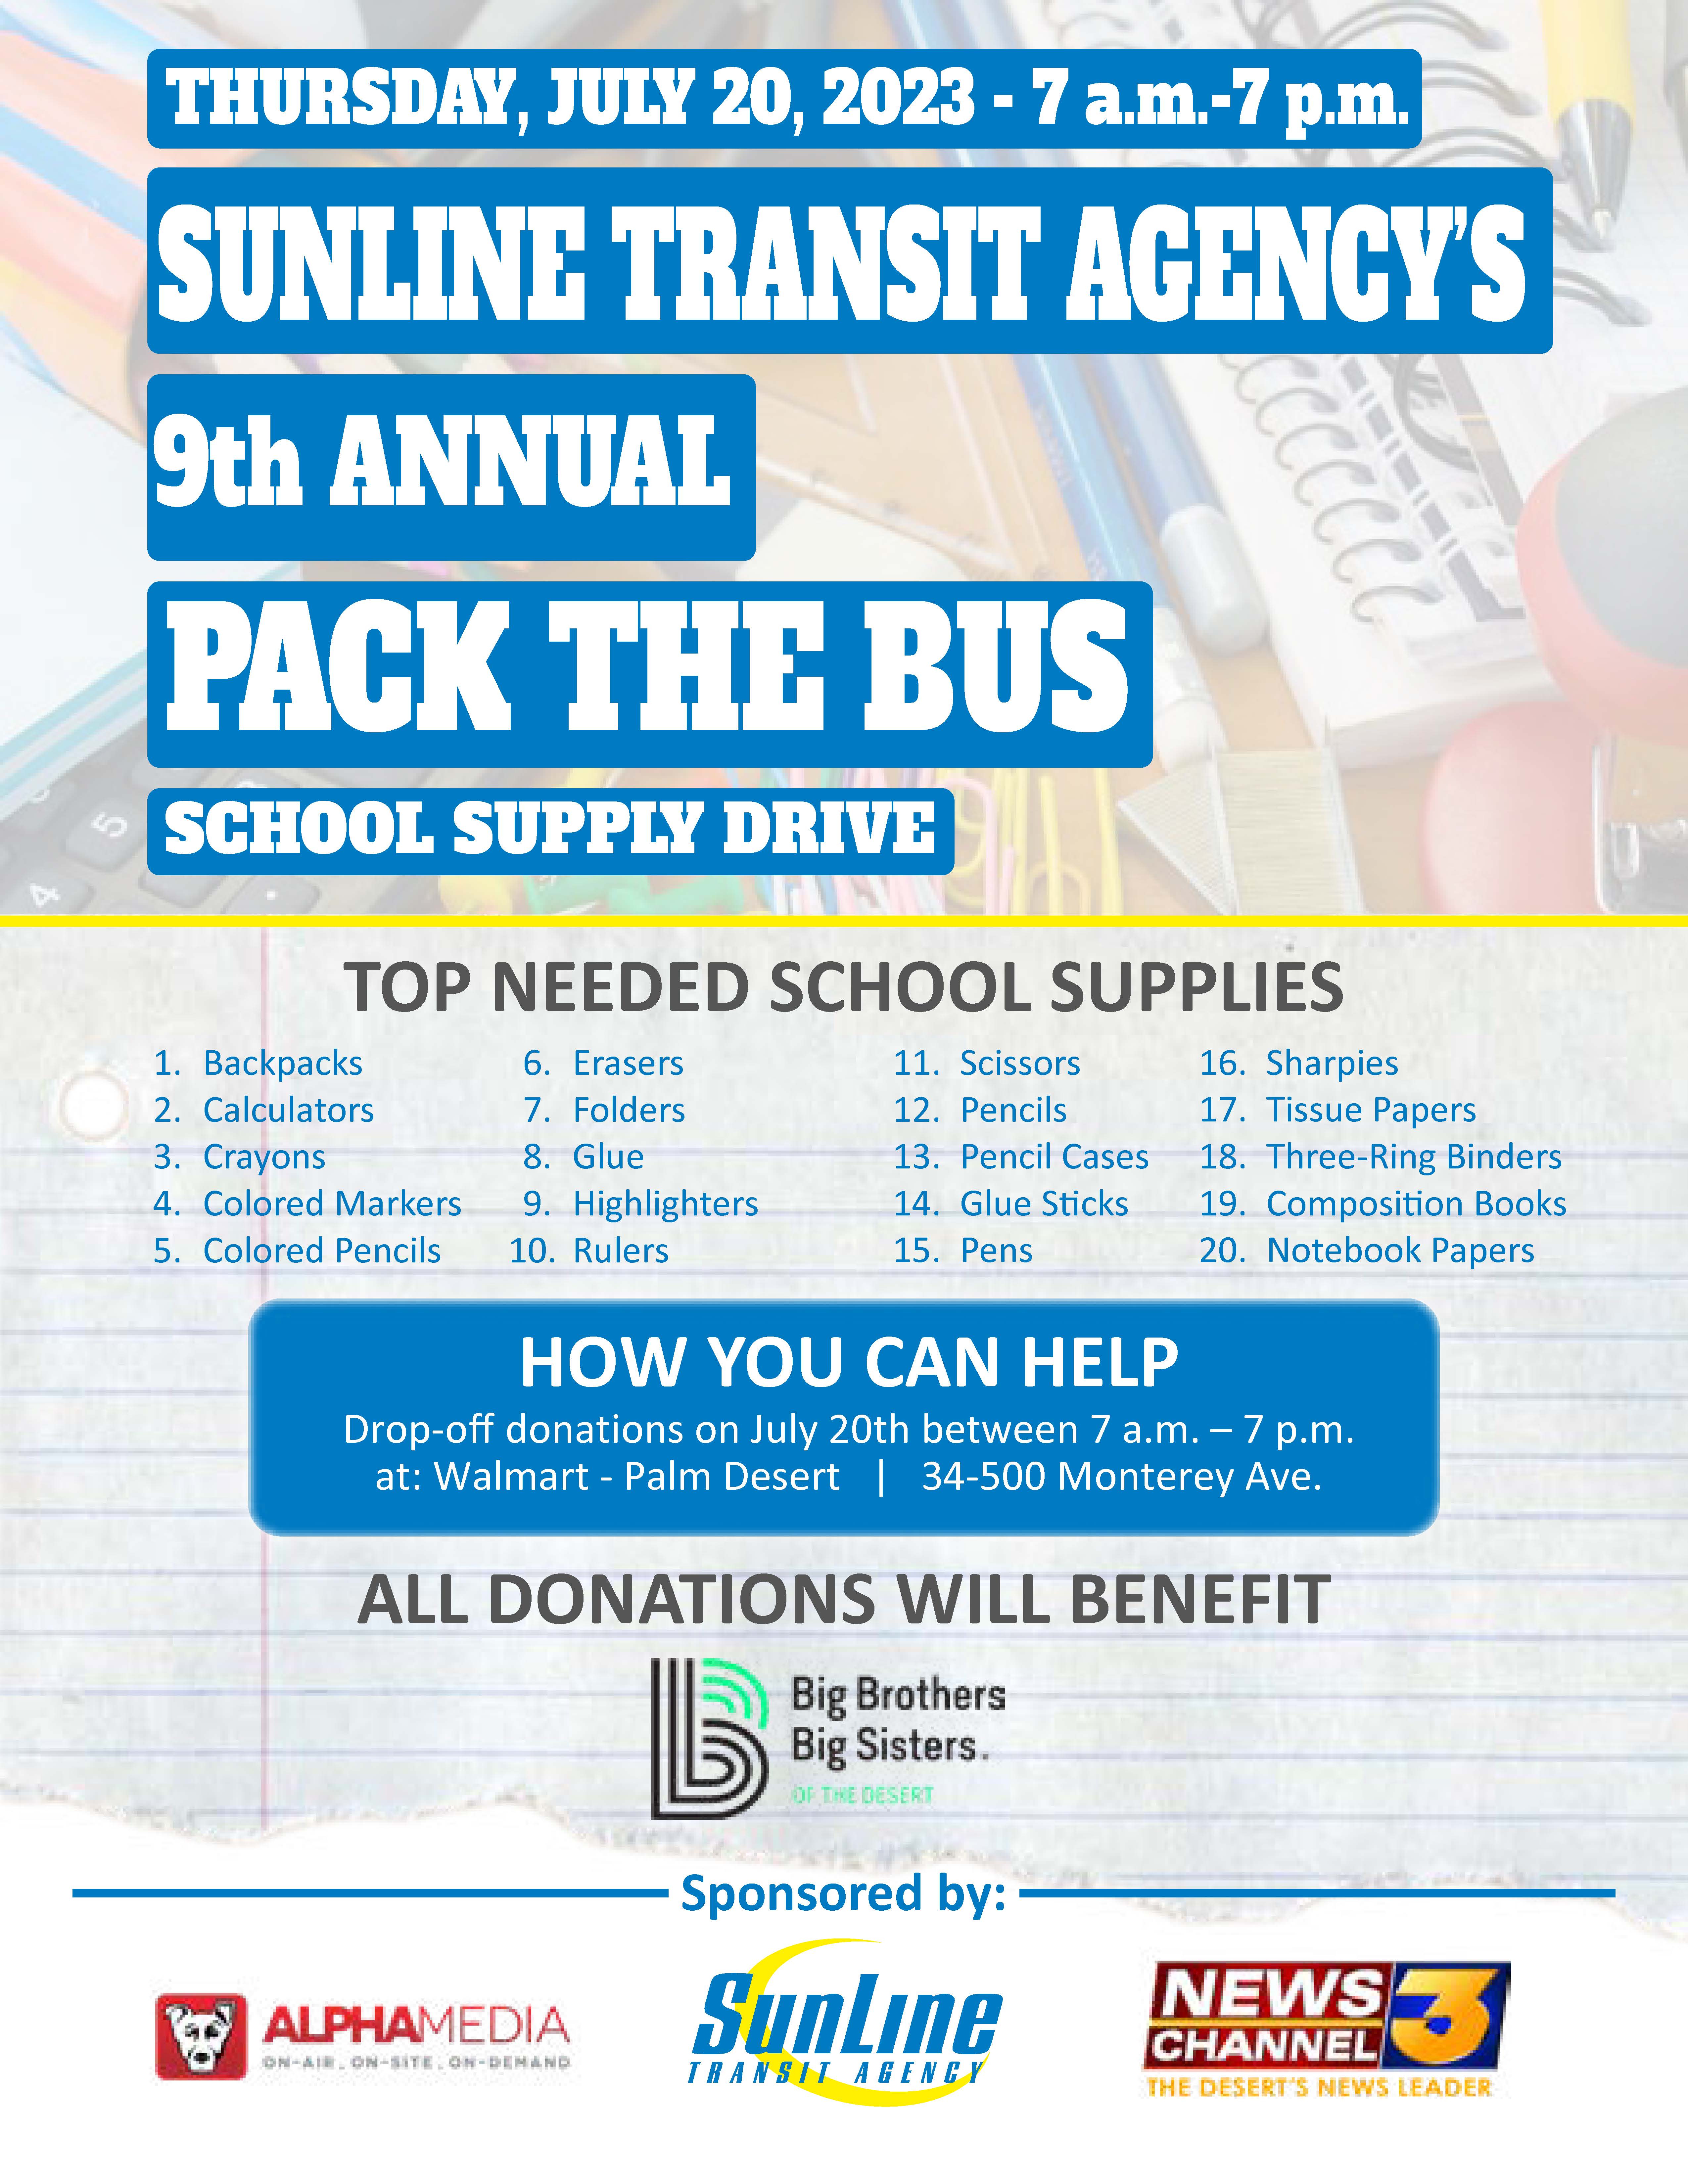 9th Annual Pack the Bus school supply drive flyer